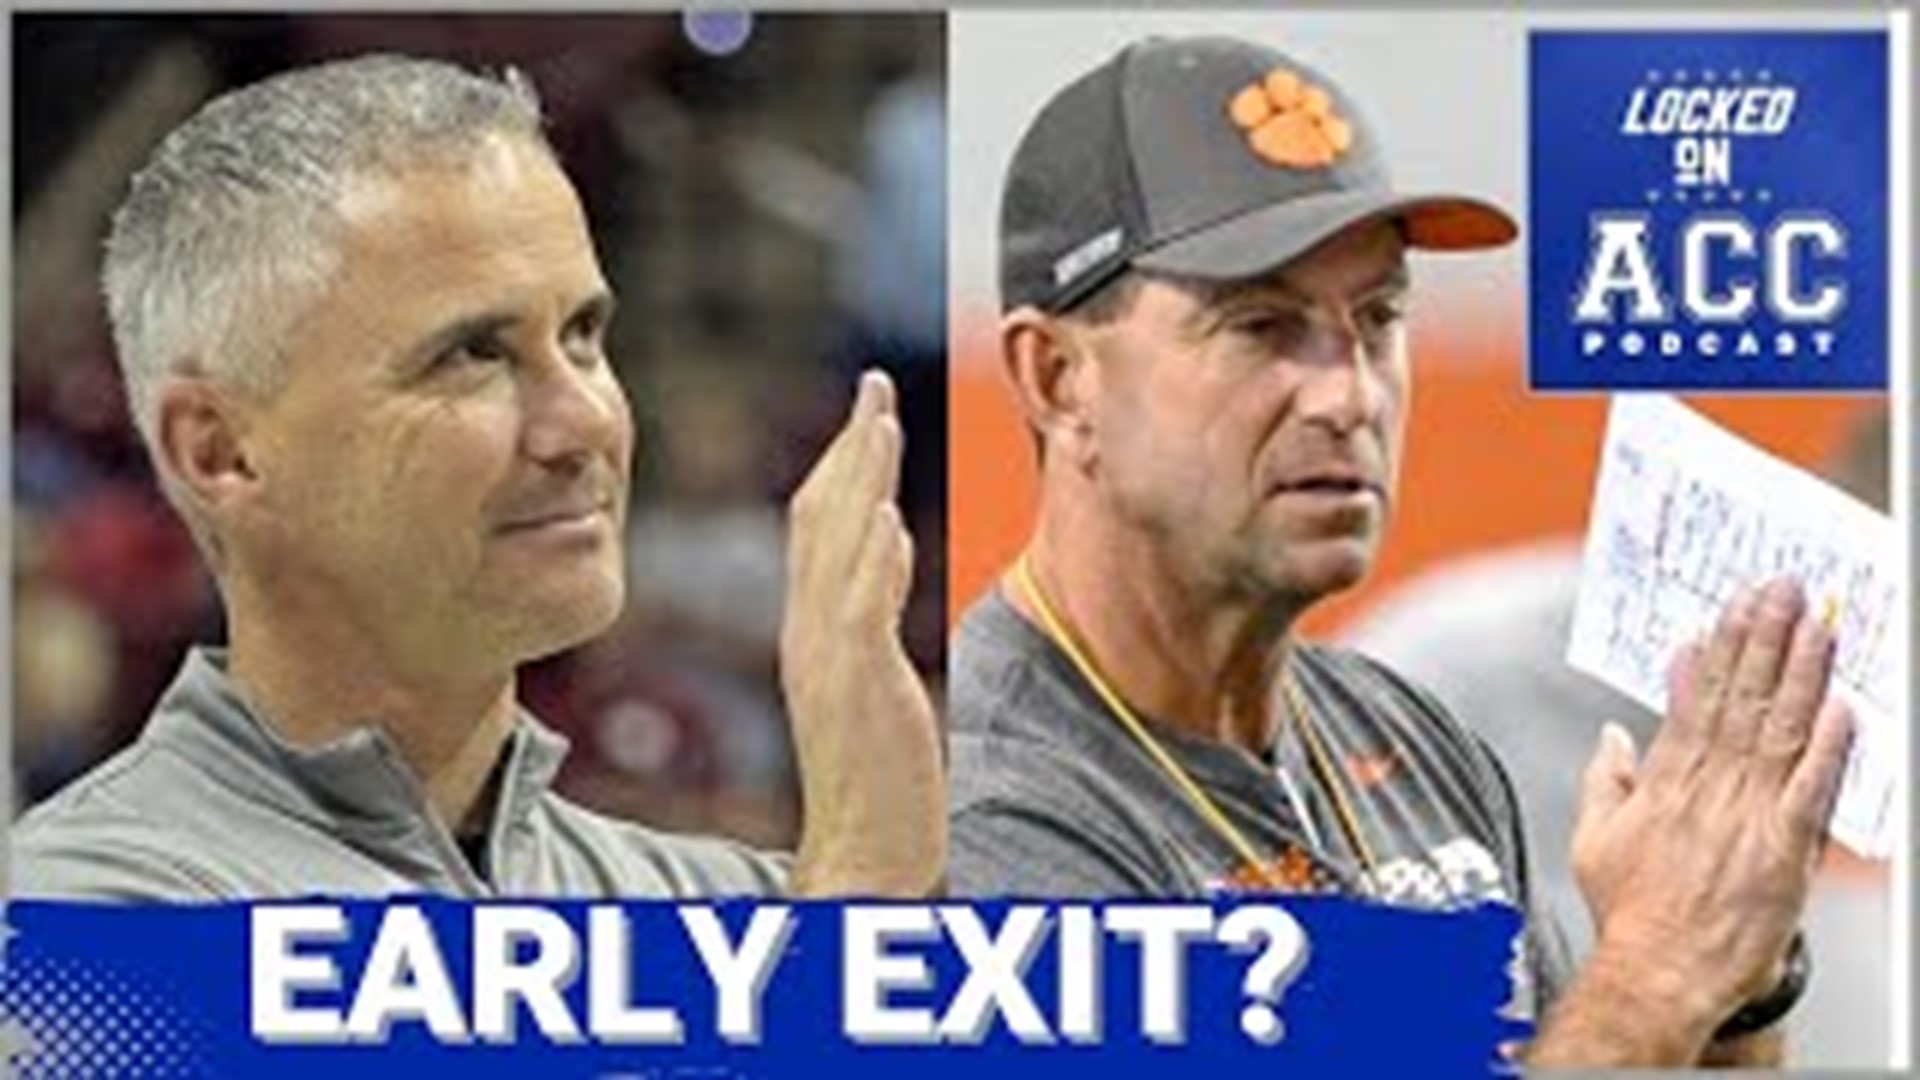 There are rumors circulating that the ACC could collapse by June 30th of this year. Could Florida State and Clemson really create a chain reaction so quickly?